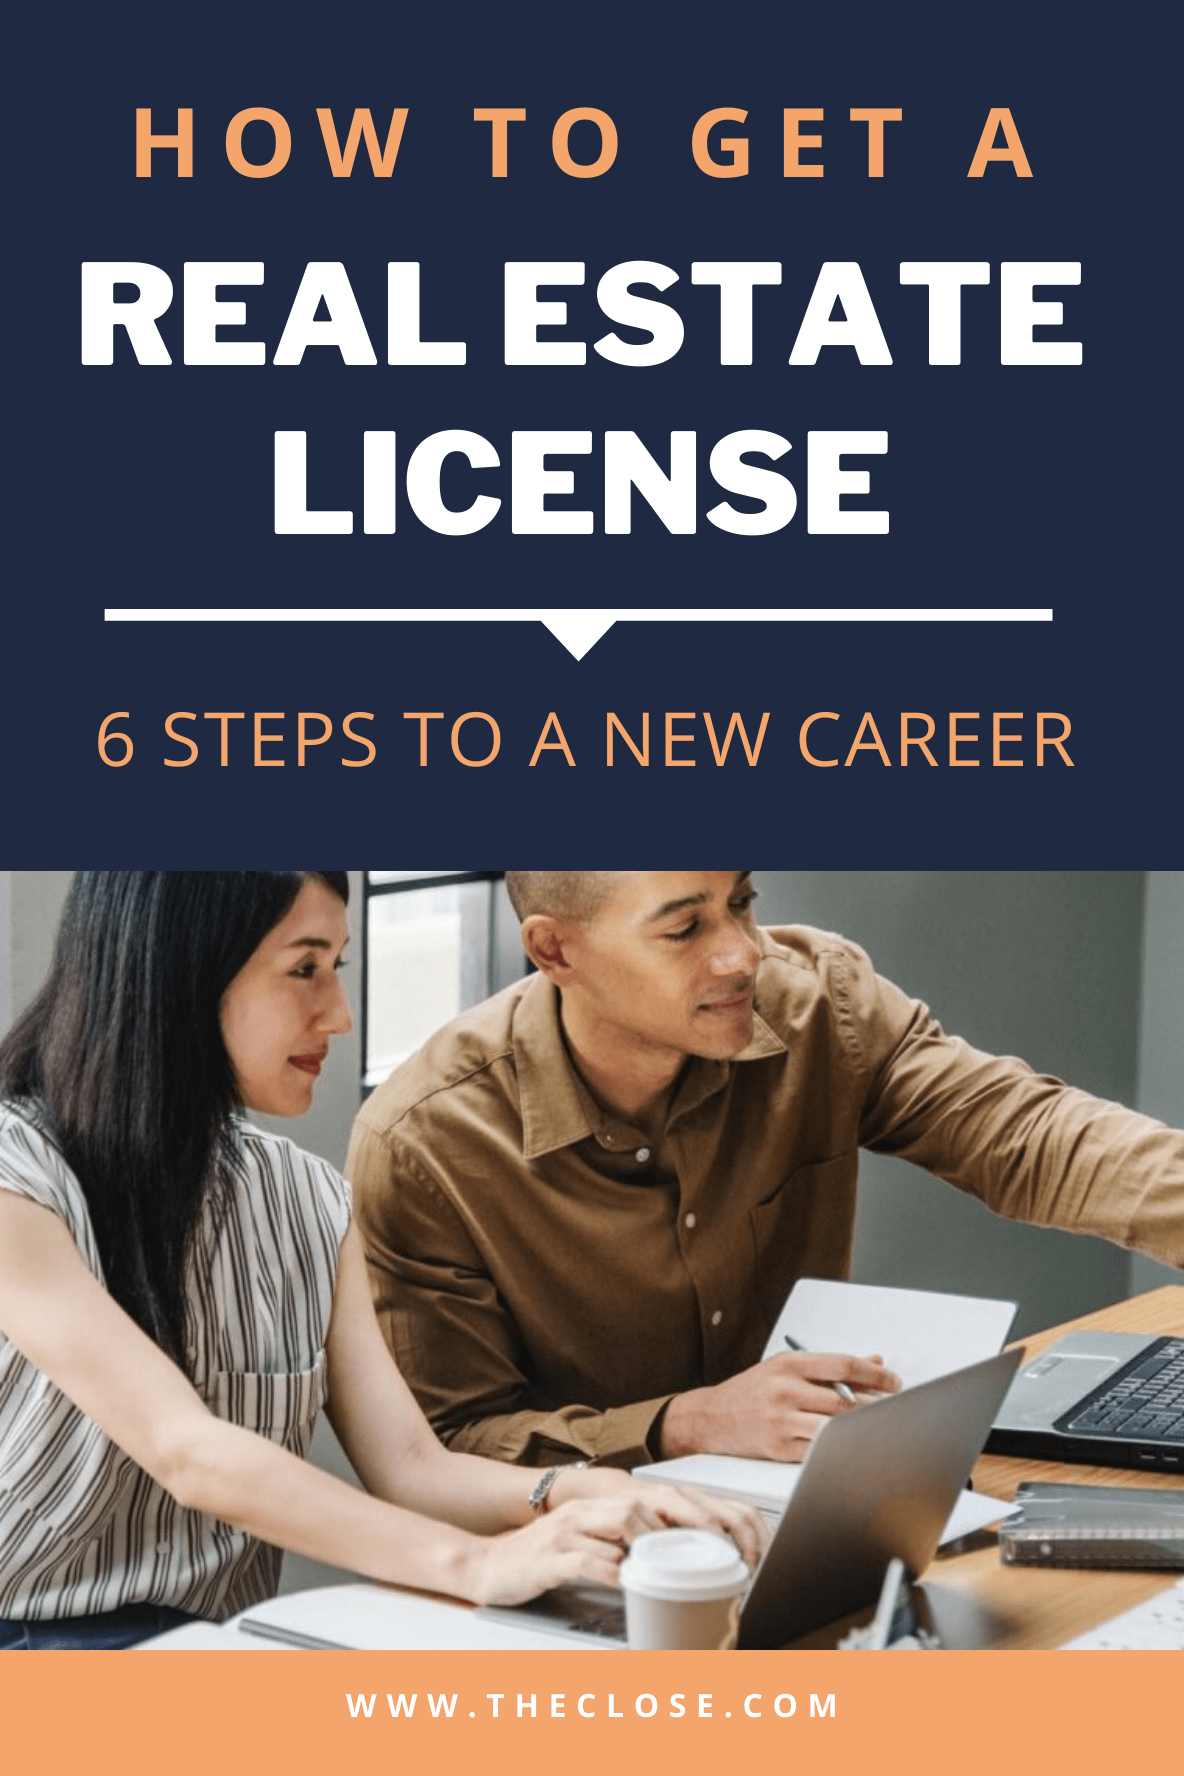 where to study to become a real estate agent